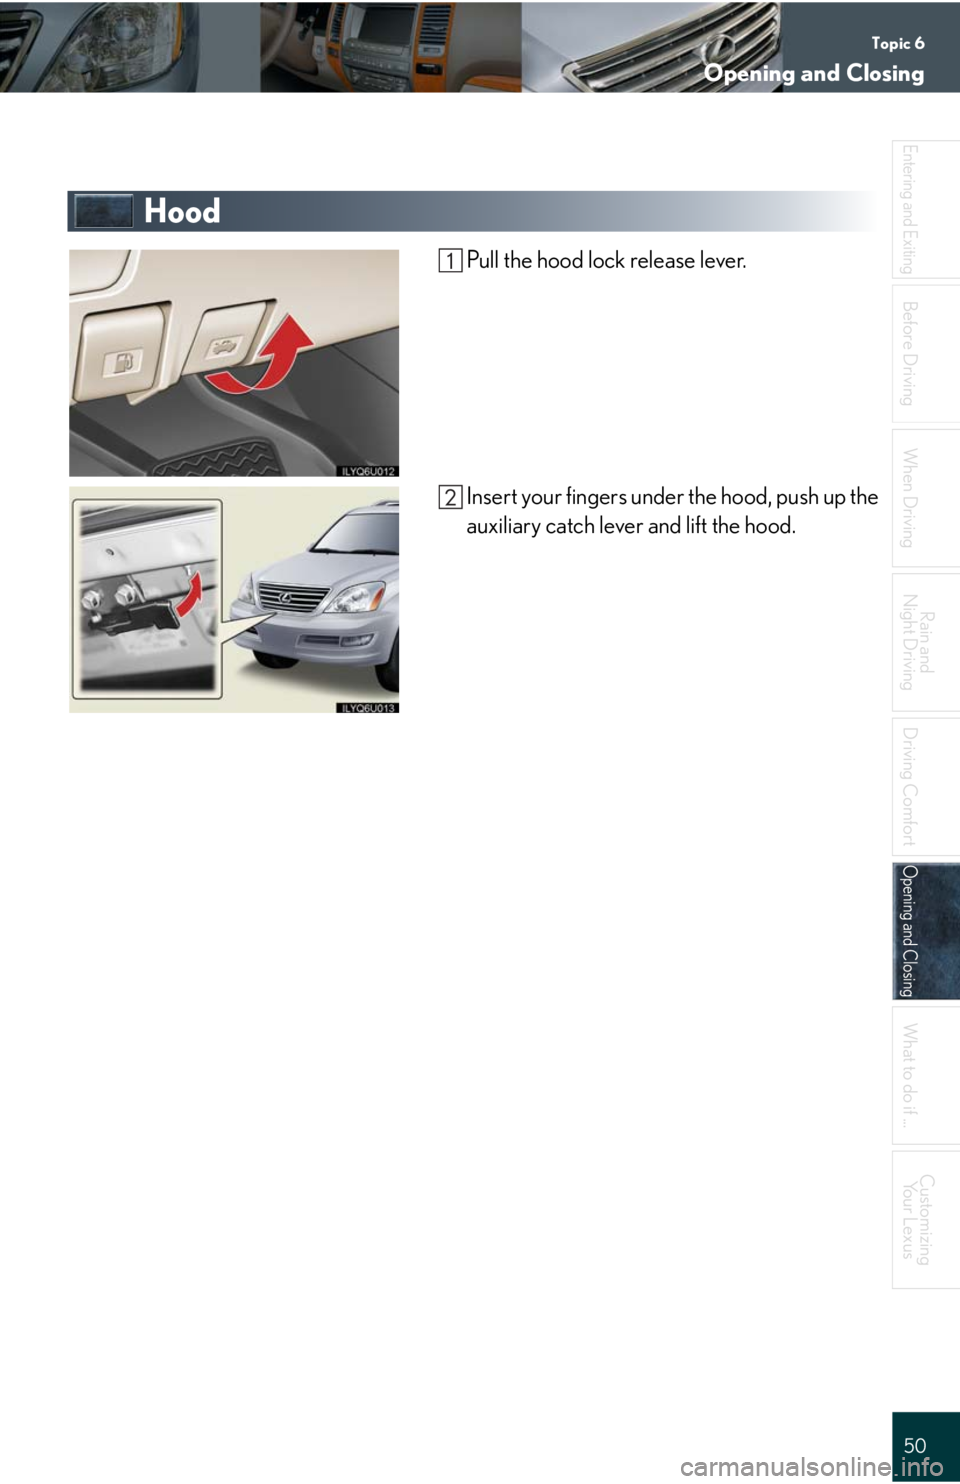 Lexus GX470 2008  Refueling / LEXUS 2008 GX470 QUICK GUIDE  (OM60D81U) Service Manual Topic 6
Opening and Closing
50
Entering and Exiting
Before DrivingBefore Driving
When Driving
Rain and 
Night Driving
Driving Comfort
Opening and ClosingOpening and Closing
What to do if ...
Customizi